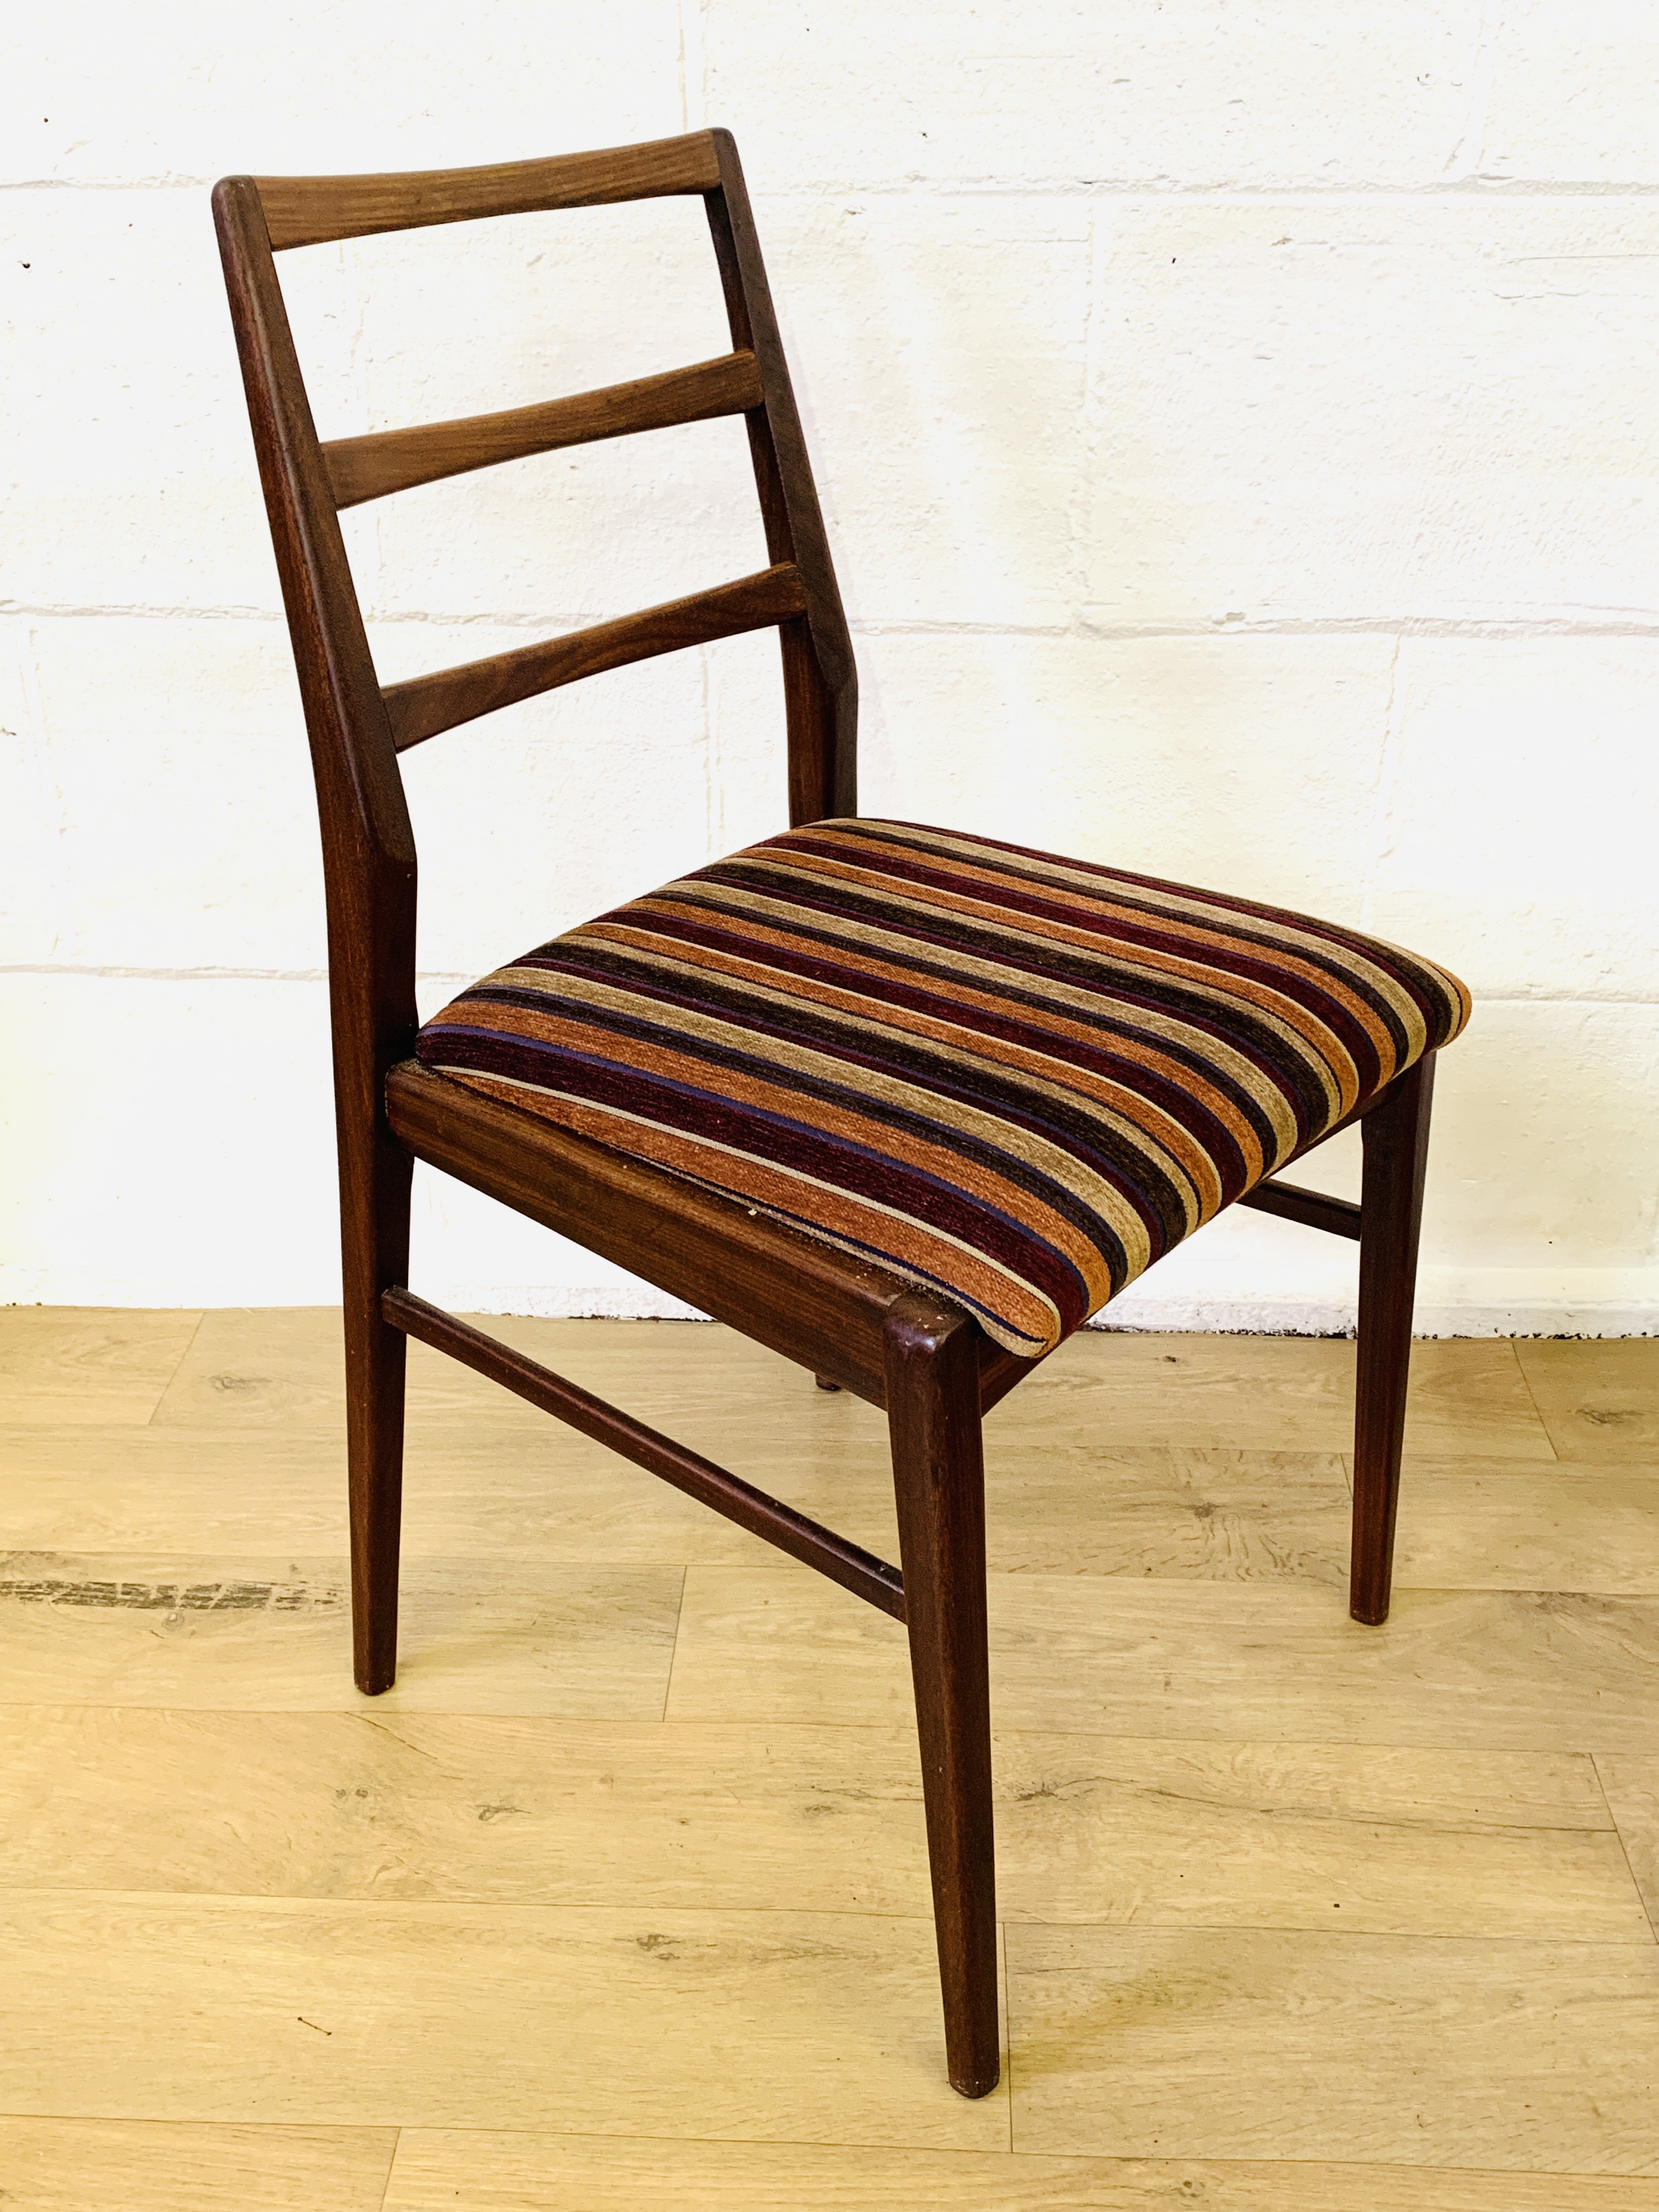 Six teak dining chairs - Image 4 of 5